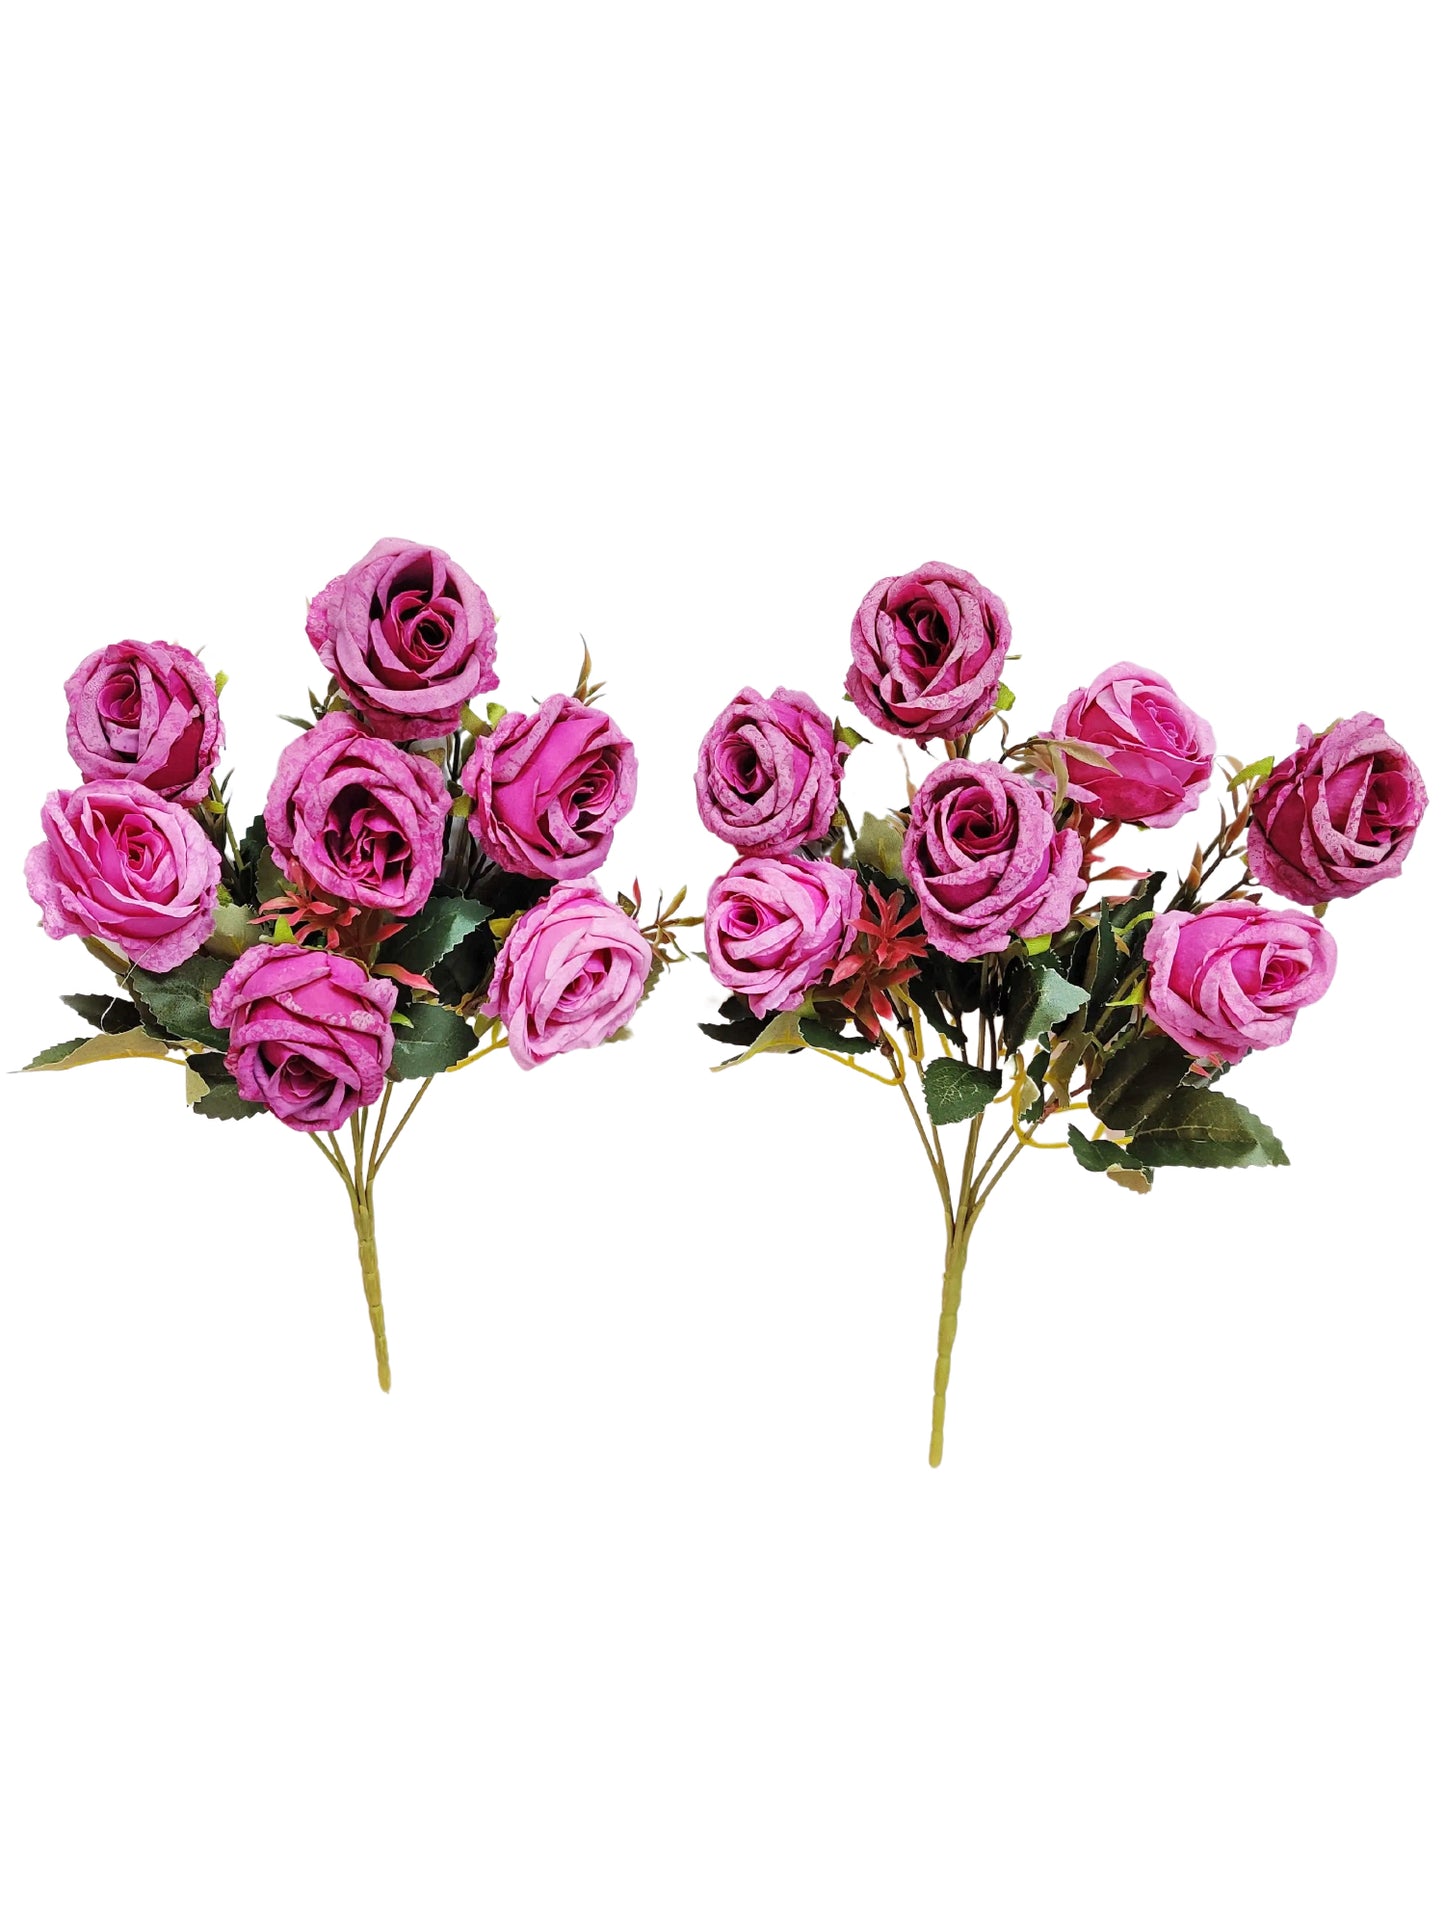 Enchanting Elegance: Artificial Purple Rose - Lifelike Beauty for Timeless Moments, Roses for vase filler, home decor, Pack of 2 Pieces, Without Vase